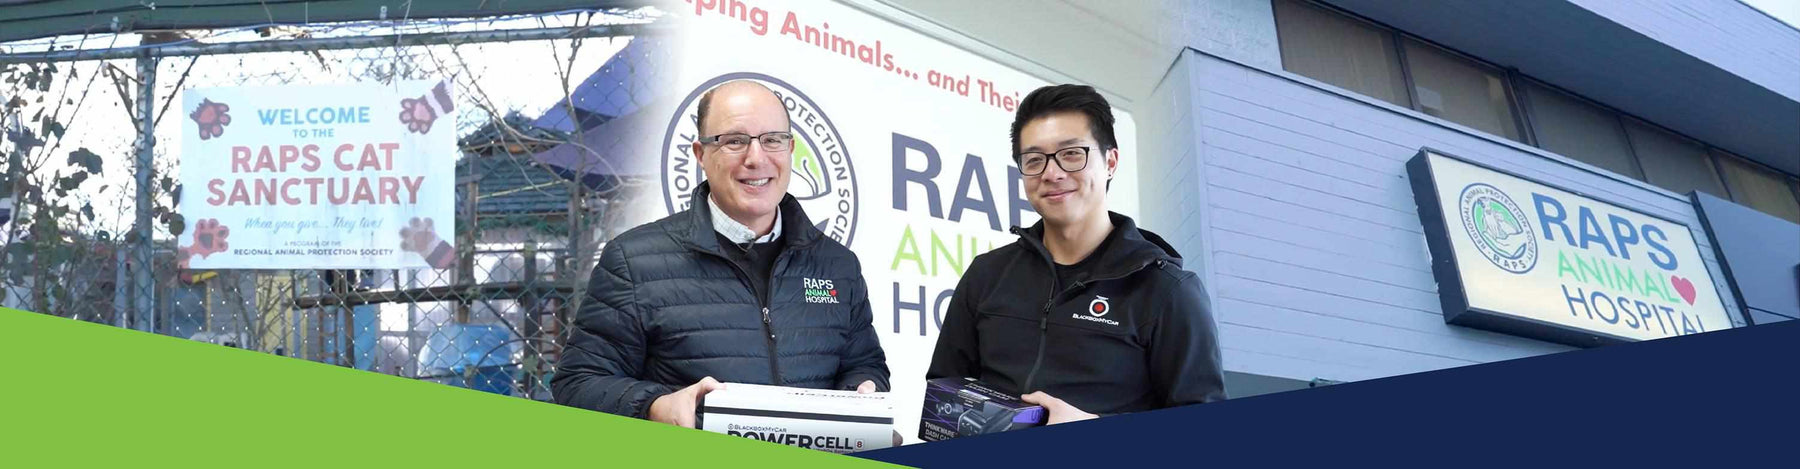 BlackboxMyCar | Helping Out In the Community - Protecting the Regional Animal Protection Society (RAPS) with Dash Cam and Battery Pack - - BlackboxMyCar